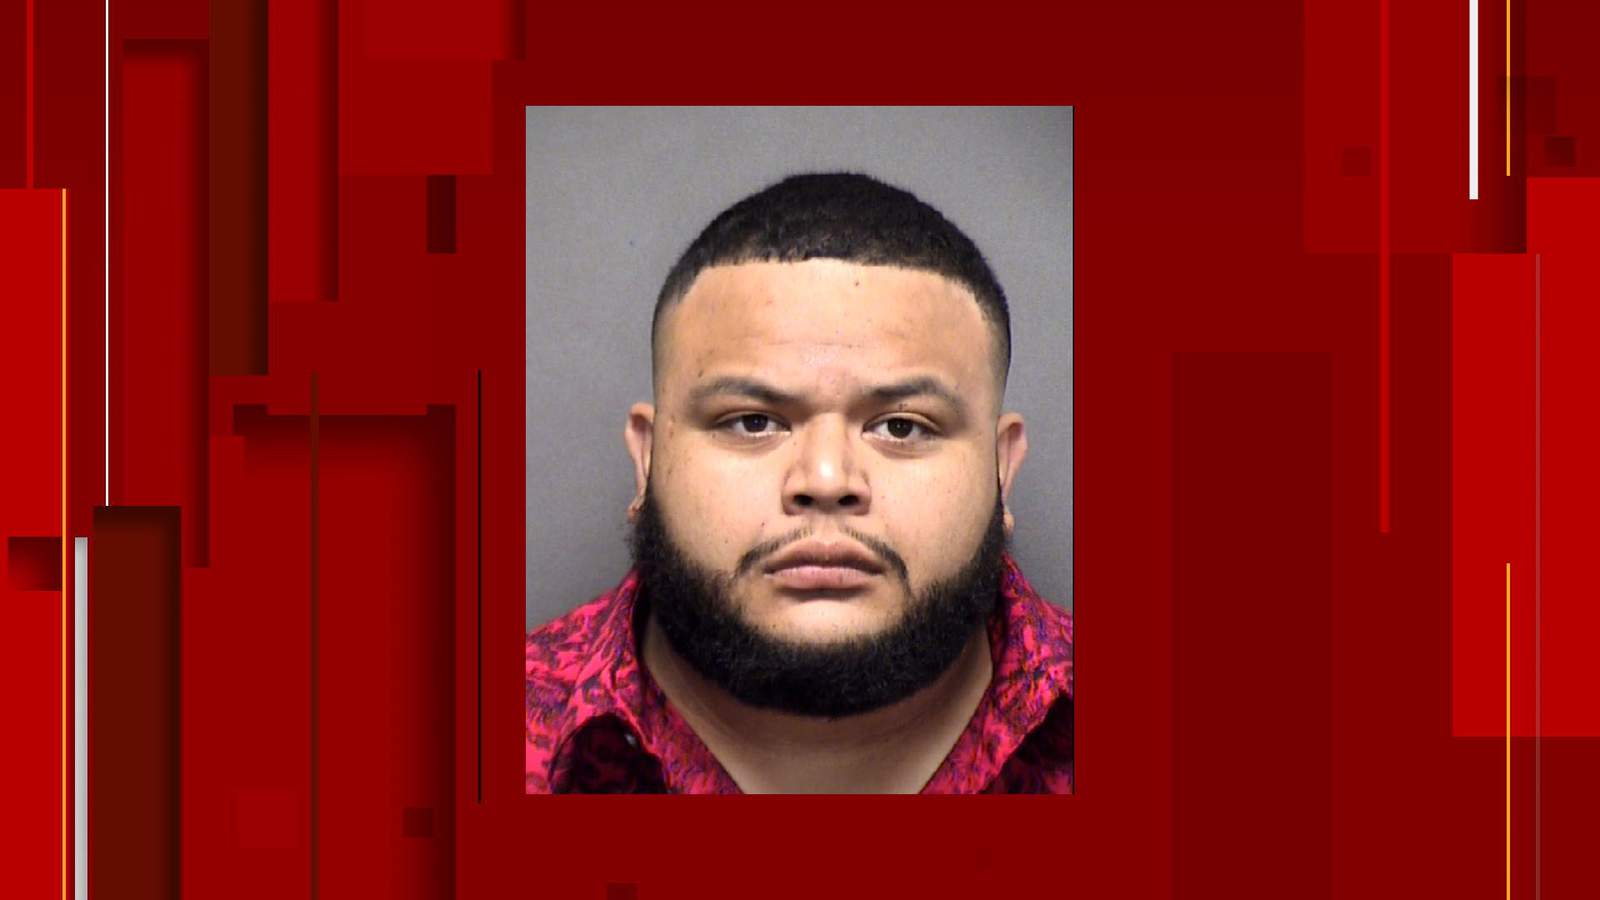 SA man, son of prominent Tejano singer, accused of choking girlfriend against refrigerator